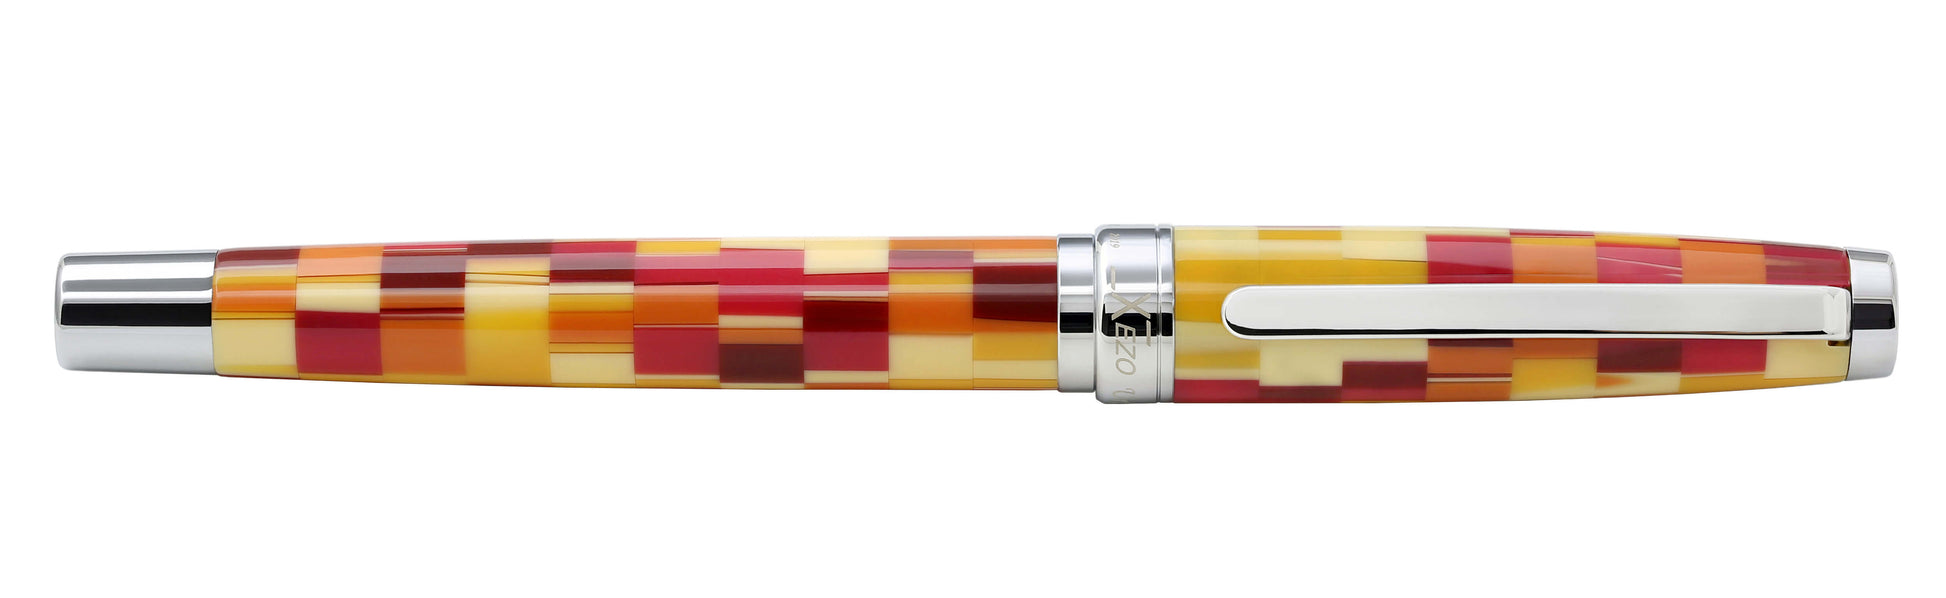 Xezo - Front view of a capped Urbanite Red FM fountain pen